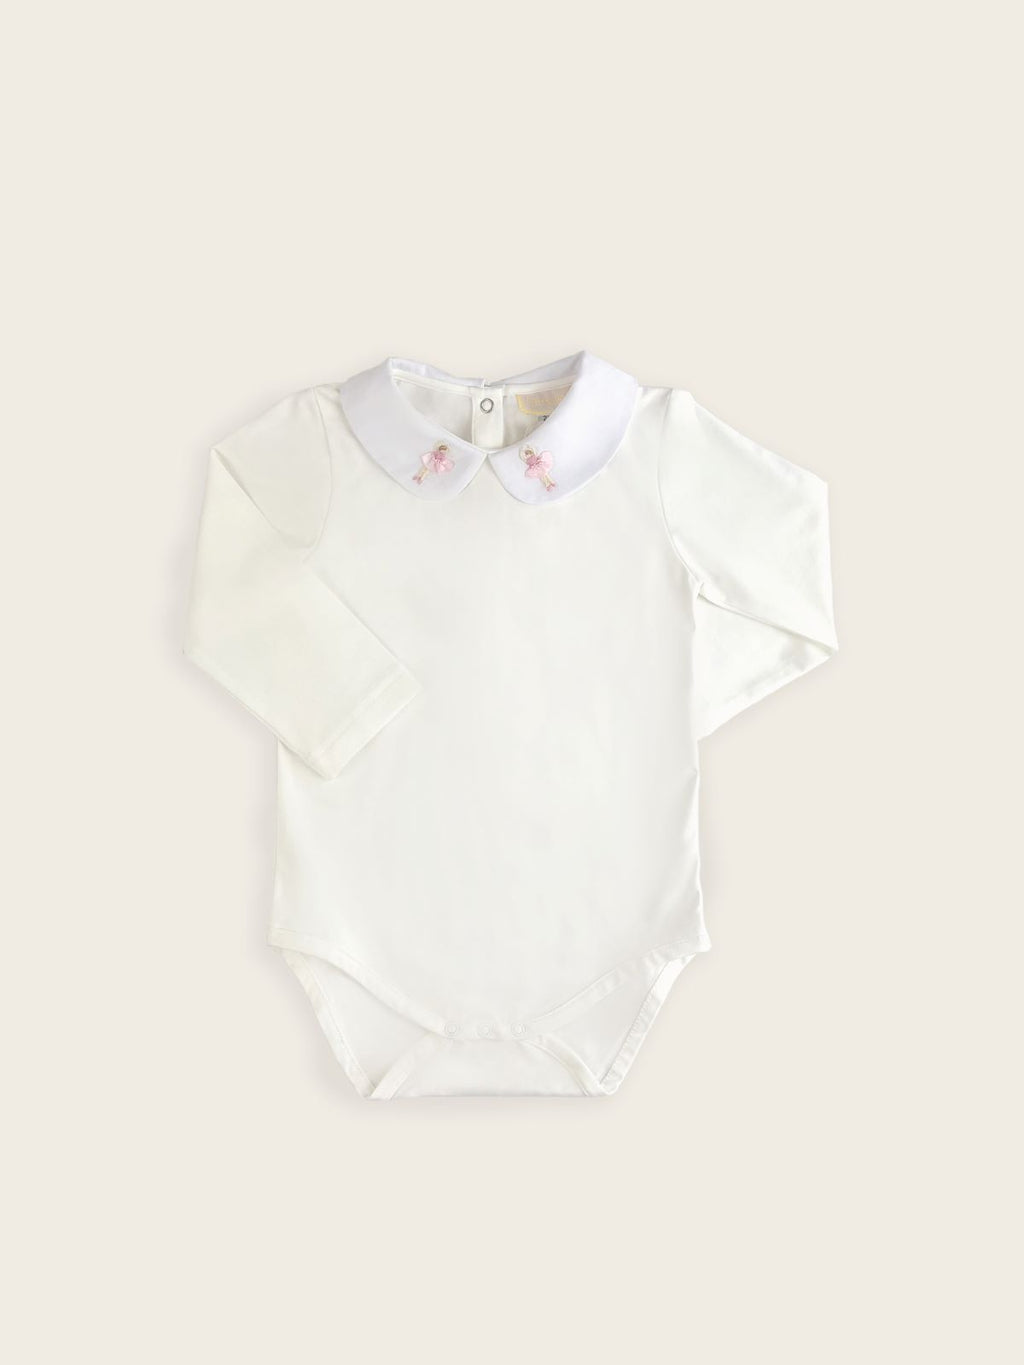 A classic pique bodysuit in white with a ballerinas embroidered onto the collar.